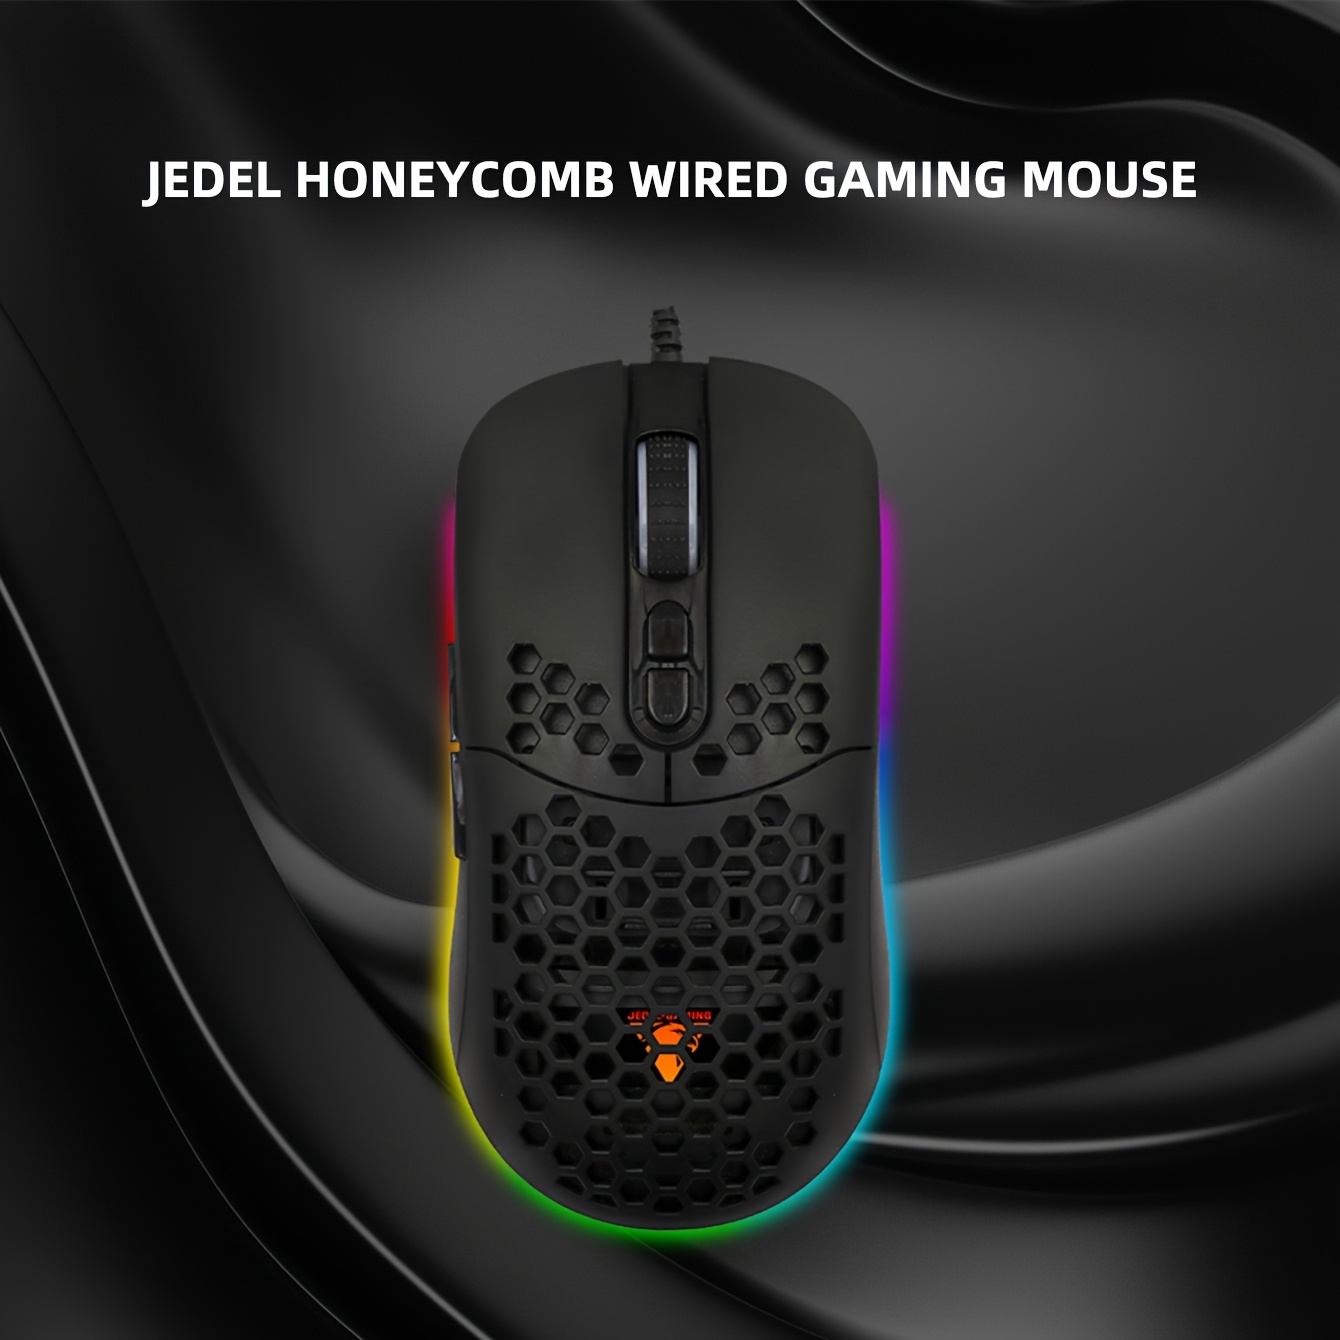 SOURIS GAMER 3 Boutons 1200 DPI Optique Filaire USB Gaming Mouse